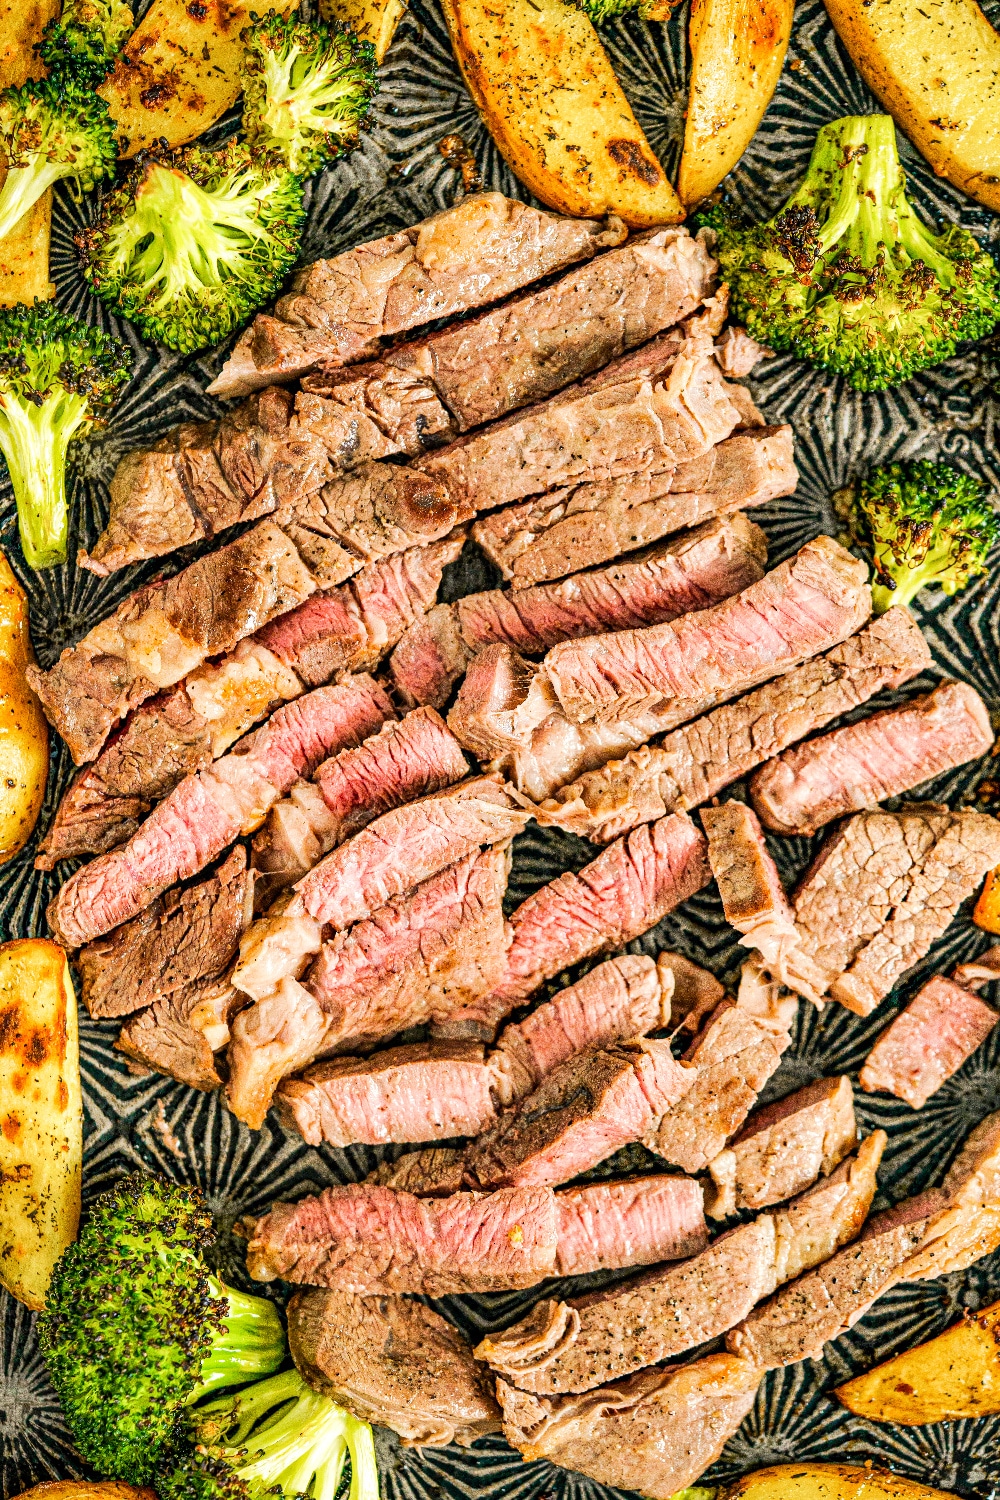 Sliced steak surrounded by broccoli and potatoes on a sheet pan.